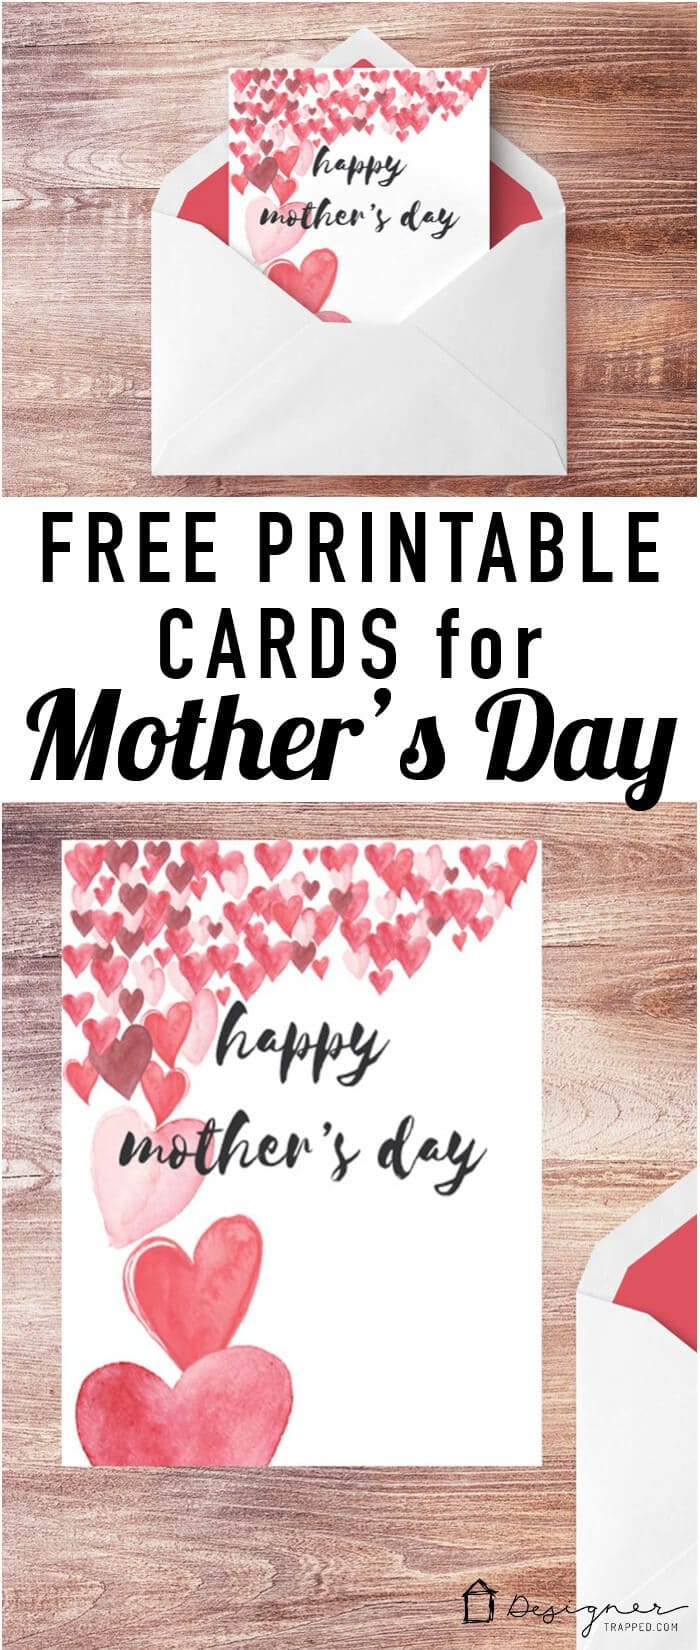 Download FREE Printable Mother's Day Cards | Kaleidoscope Living